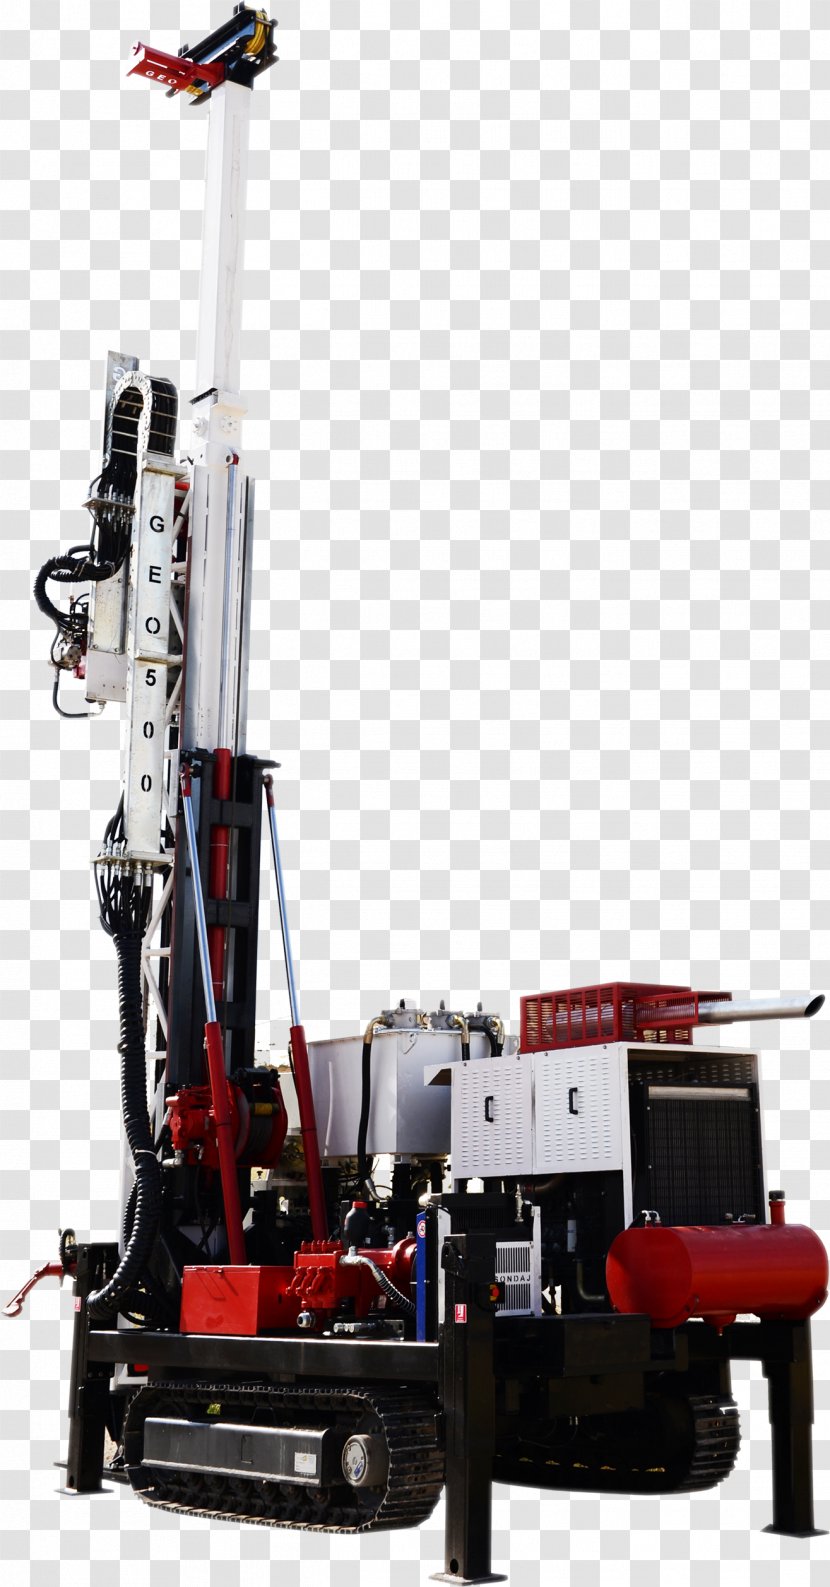 Machine Drilling Rig Augers Boring Exploration Diamond - Heavy Machinery Transparent PNG